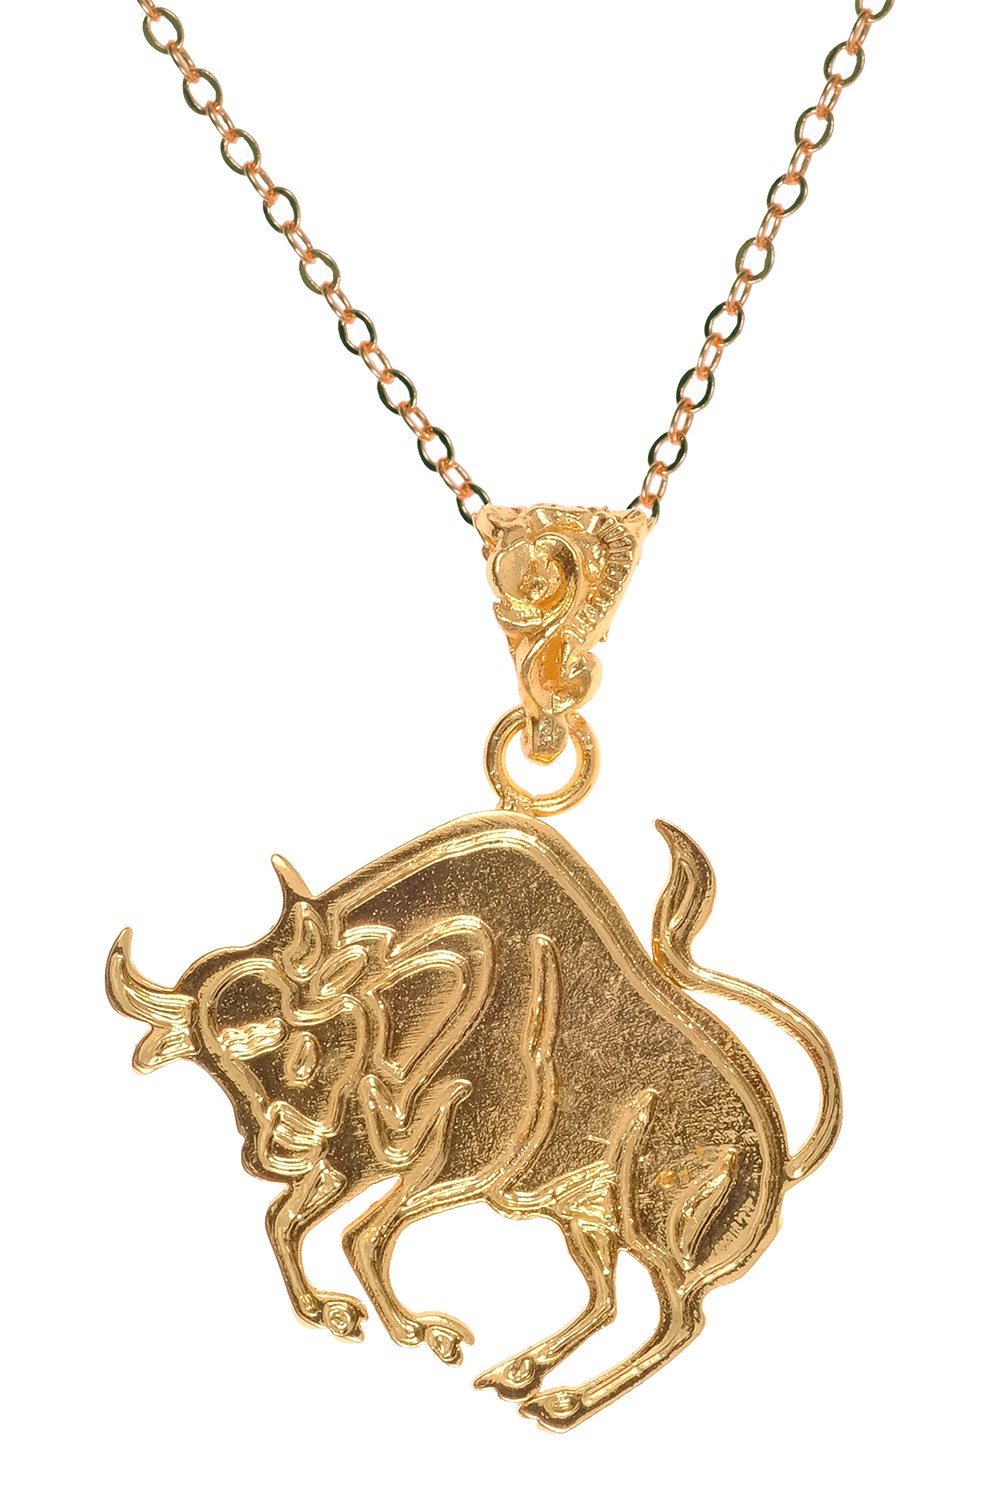 TAURUS Necklace-Gold Plated